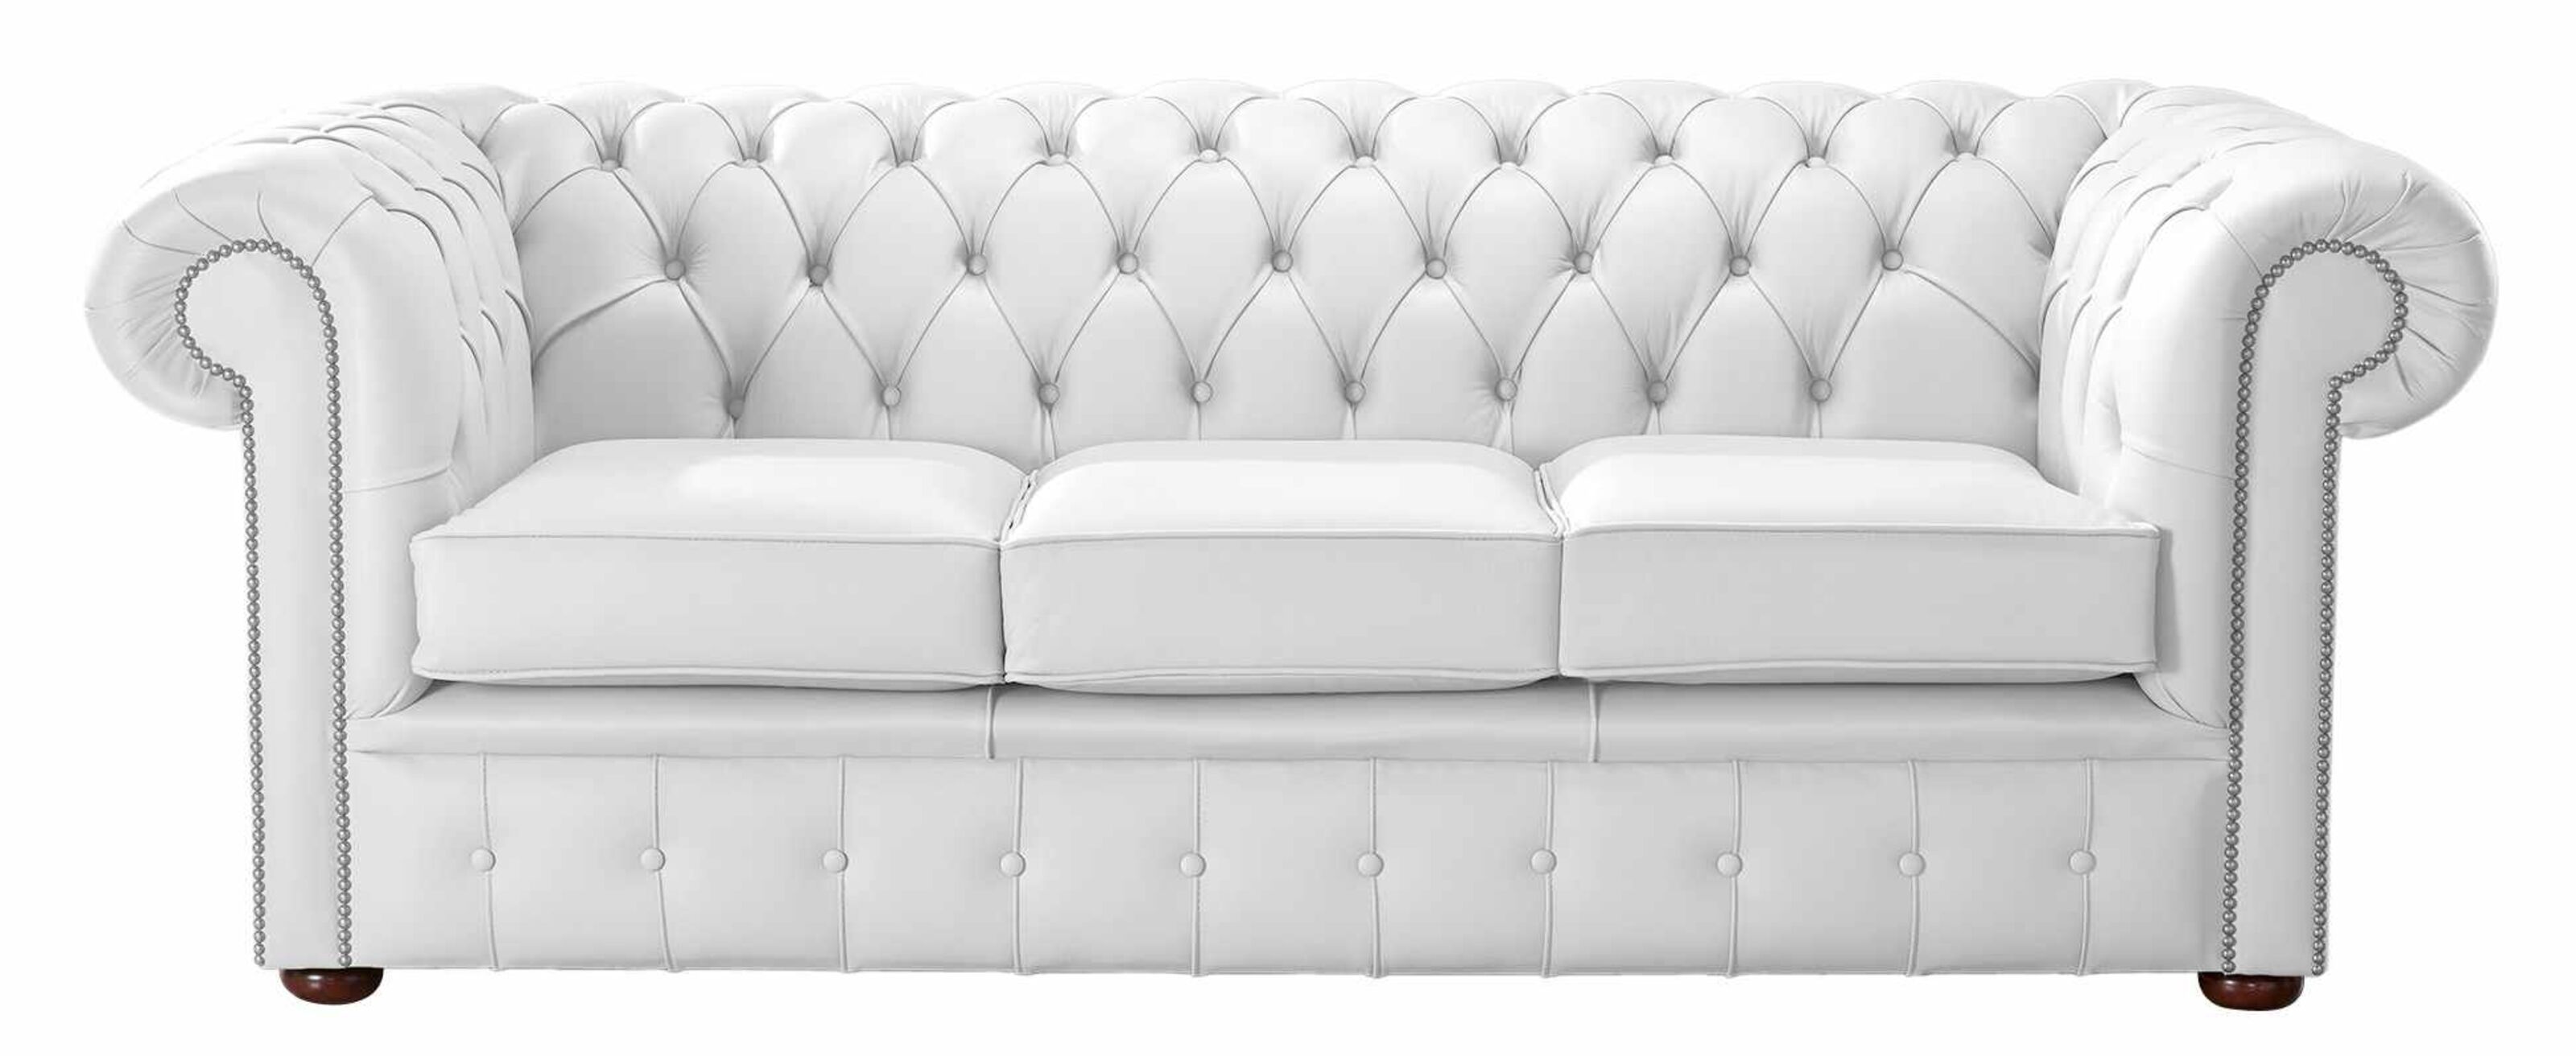 Understanding Sofa and Chesterfield Comparing Design and Features  %Post Title